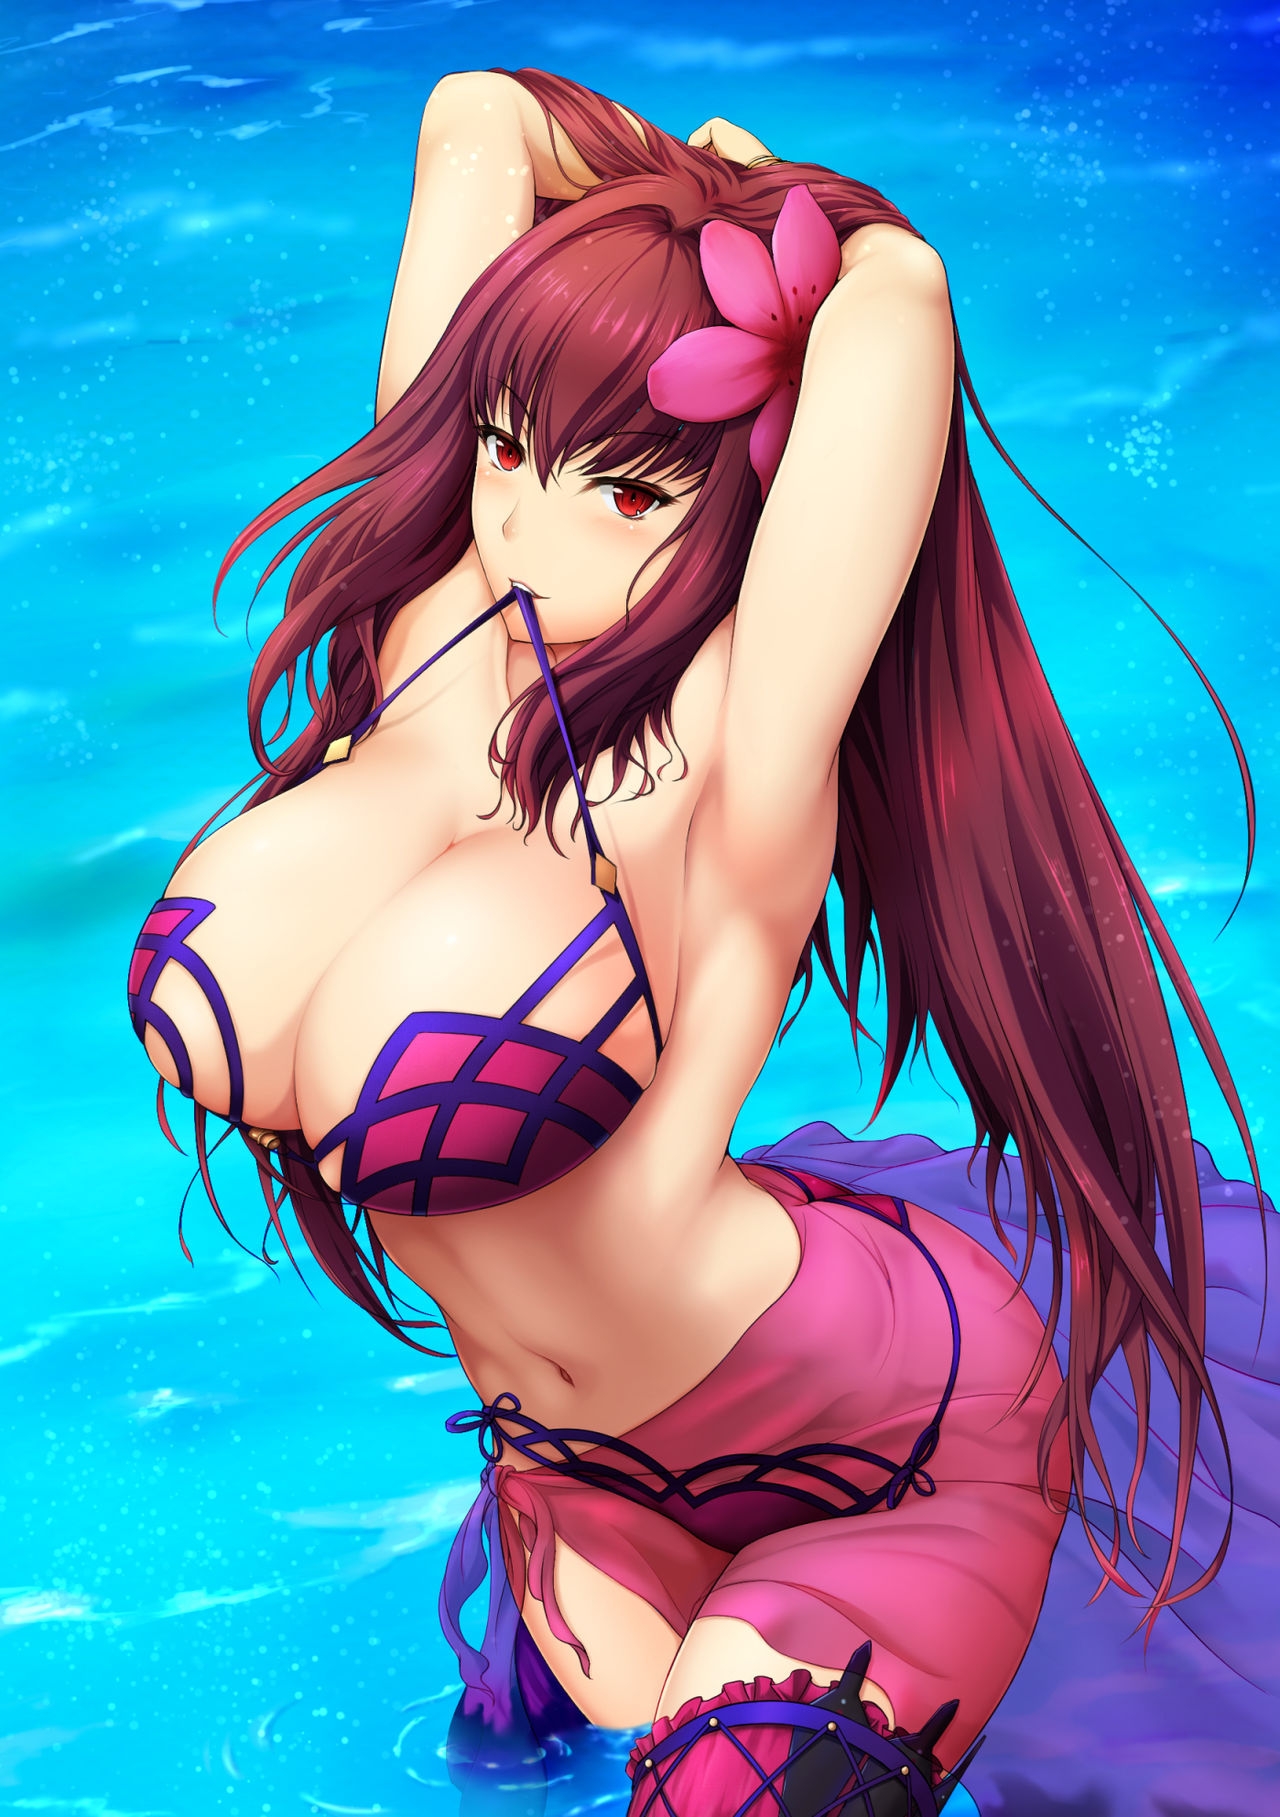 Scathach Fate/Grand Order 96